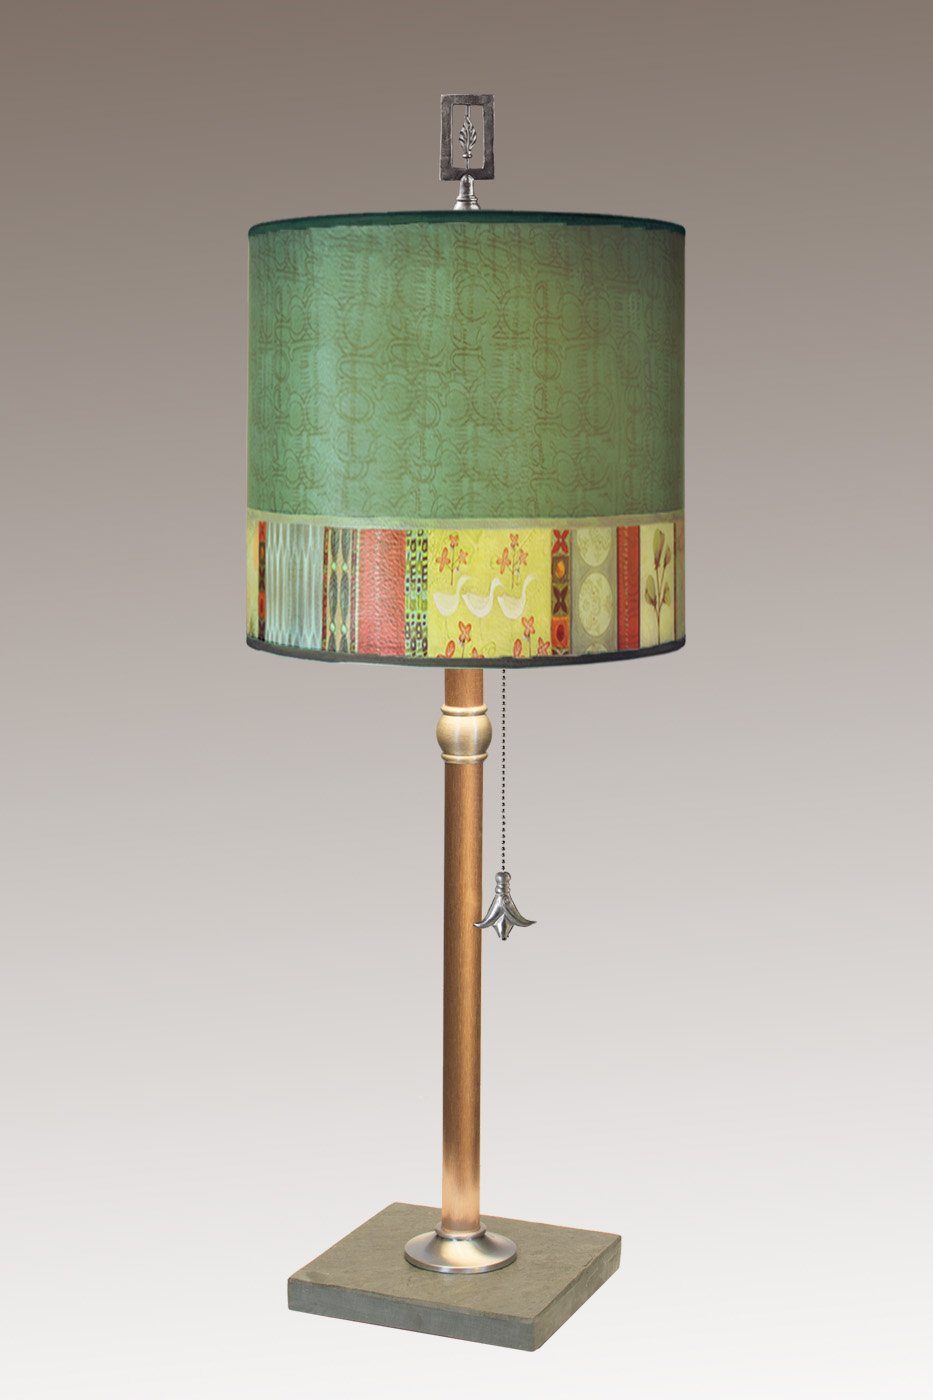 Janna Ugone & Co Table Lamps Copper Table Lamp with Medium Drum Shade in Melody in Jade